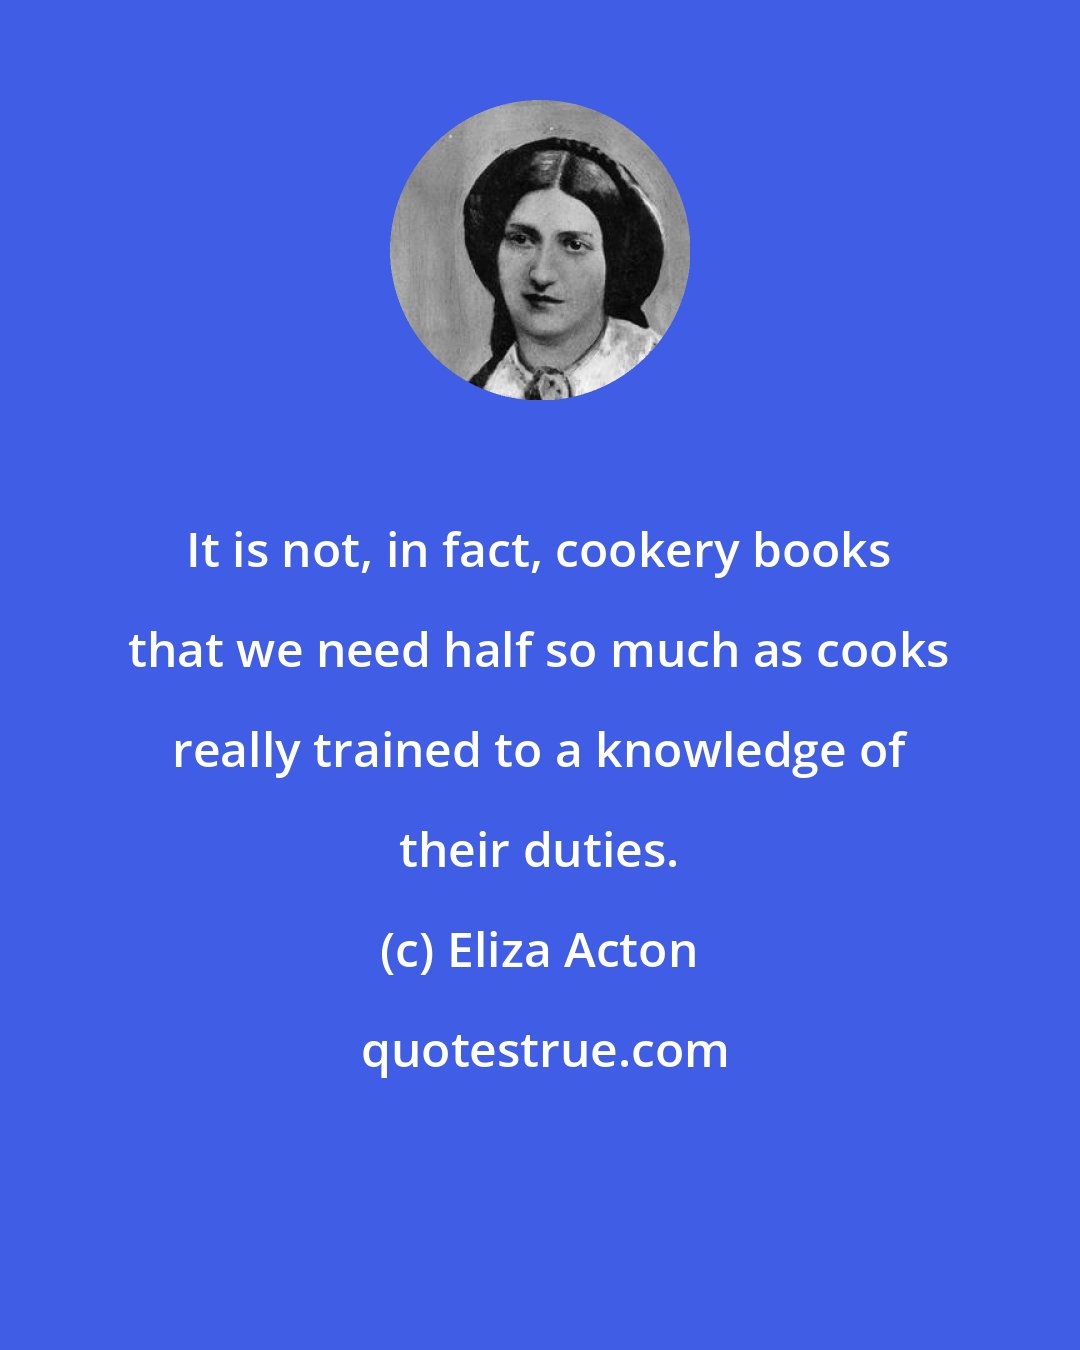 Eliza Acton: It is not, in fact, cookery books that we need half so much as cooks really trained to a knowledge of their duties.